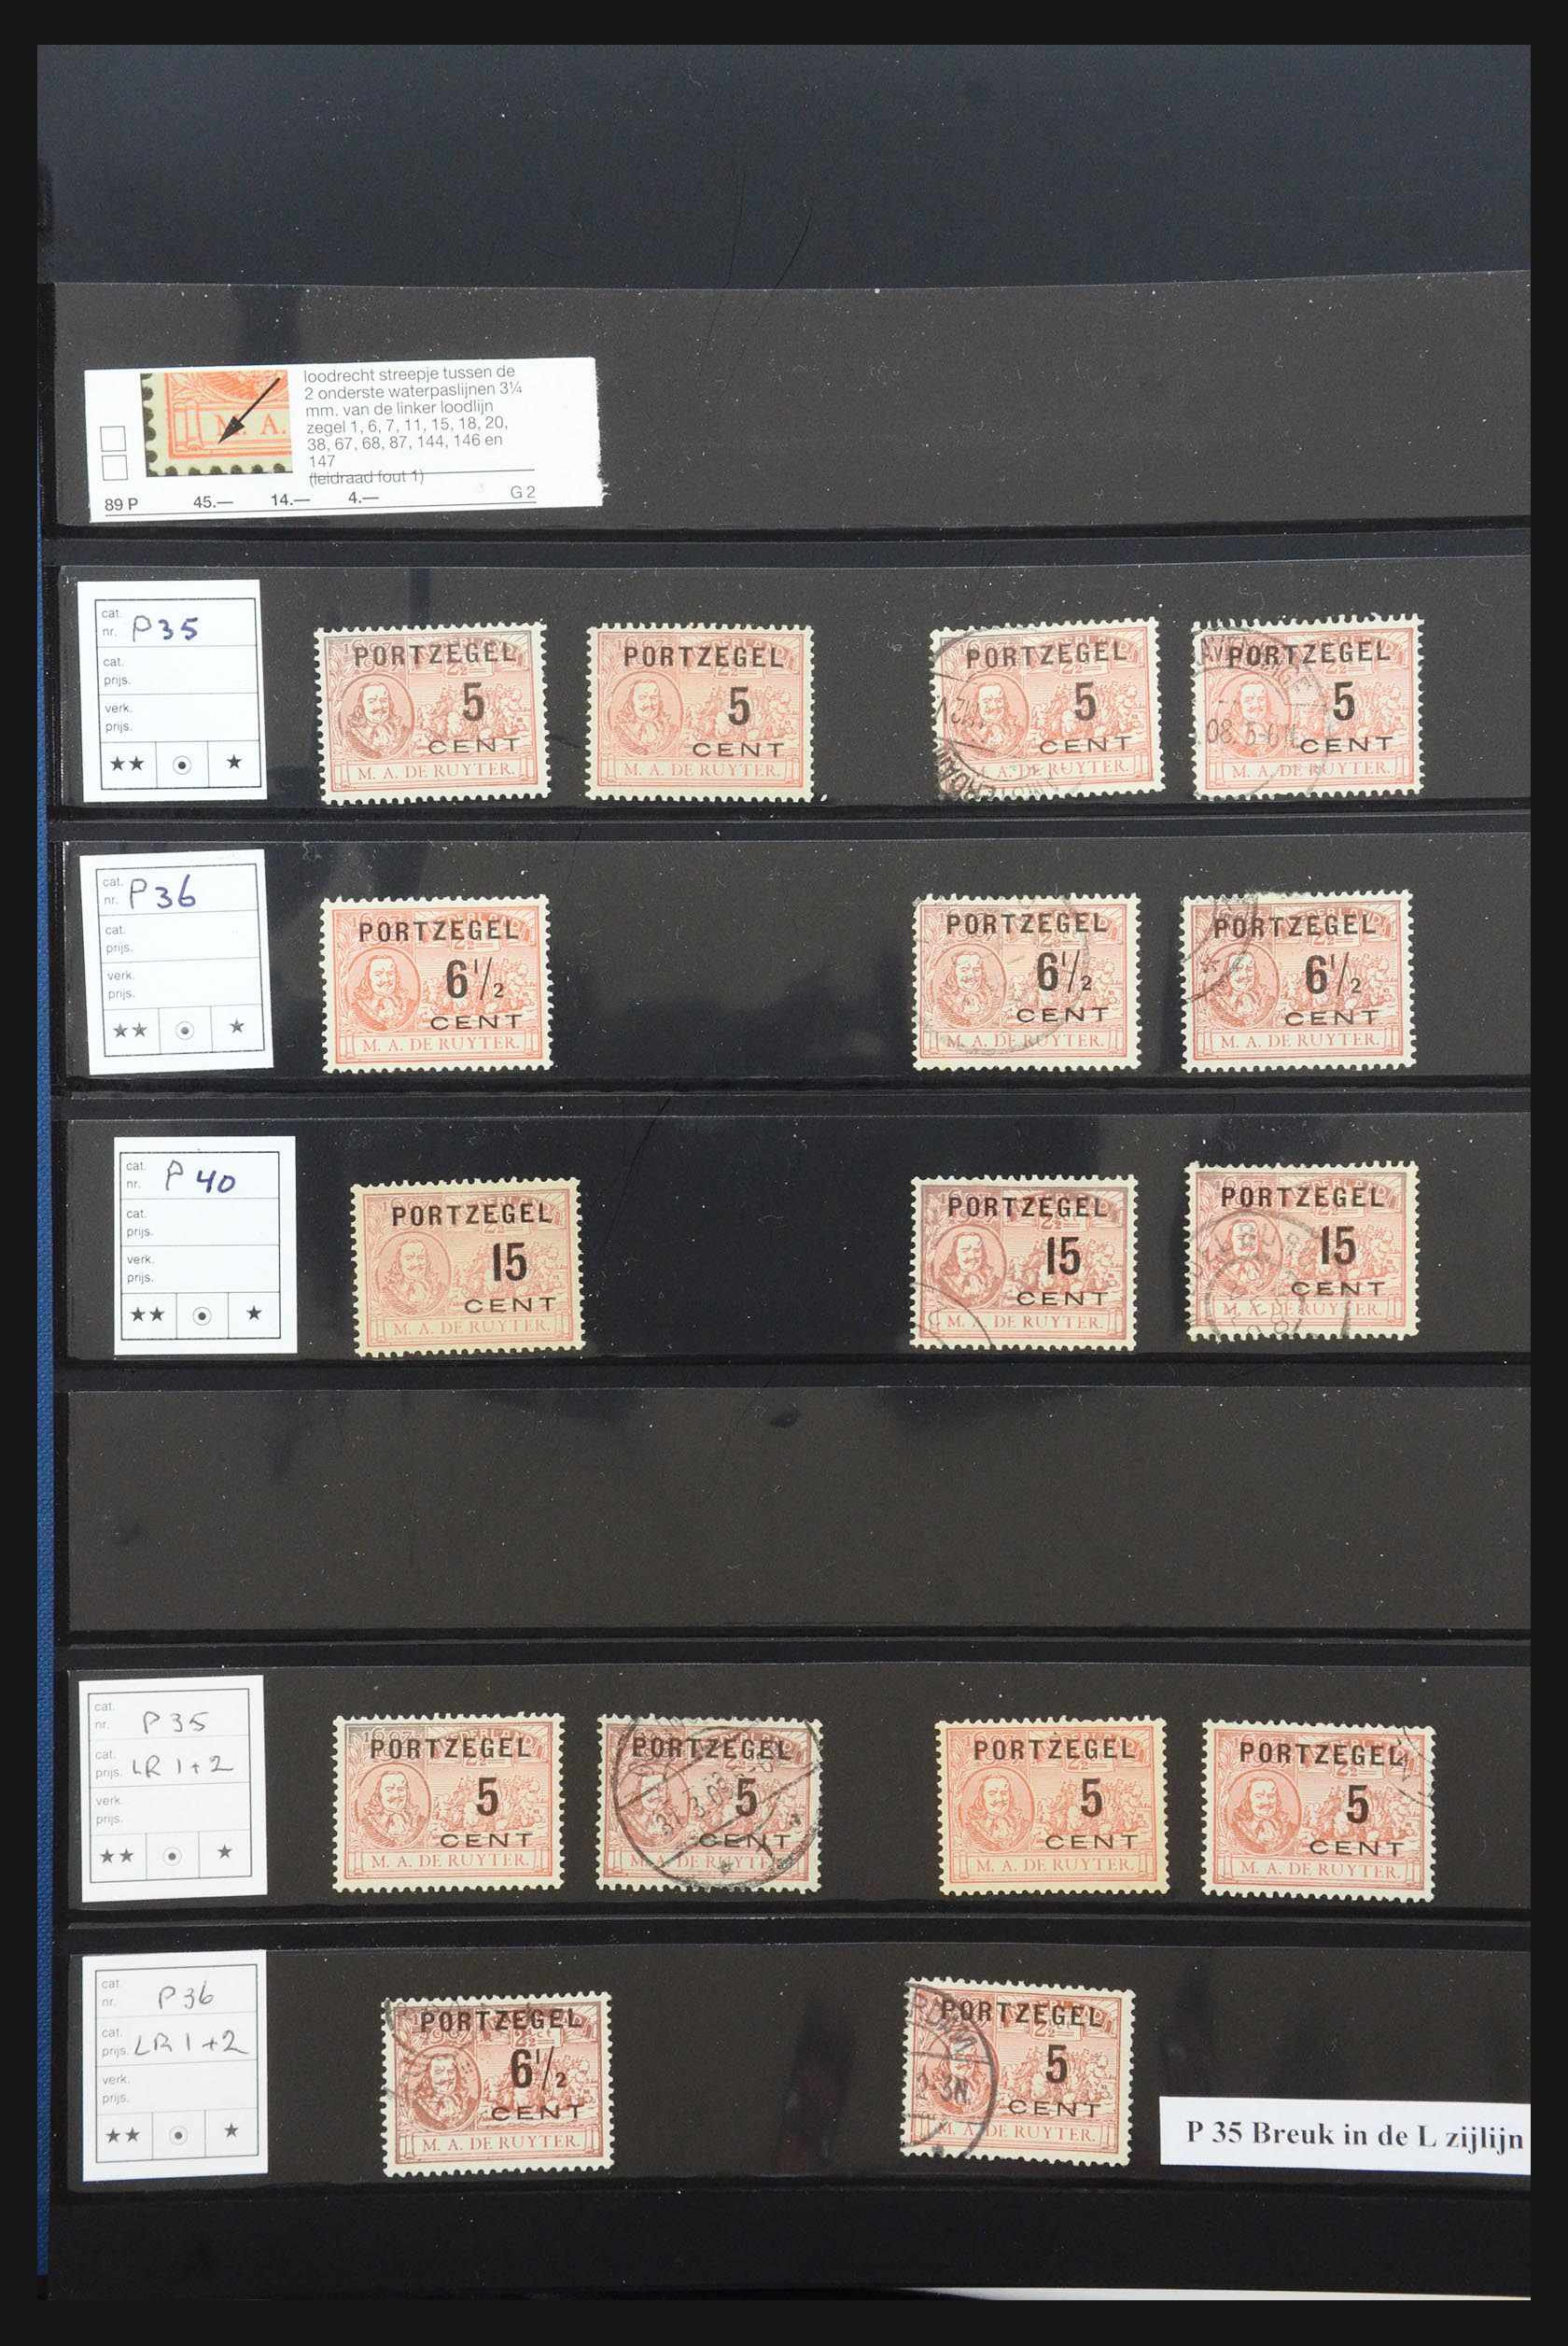 31623 031 - 31623 Netherlands postage dues plateflaws.